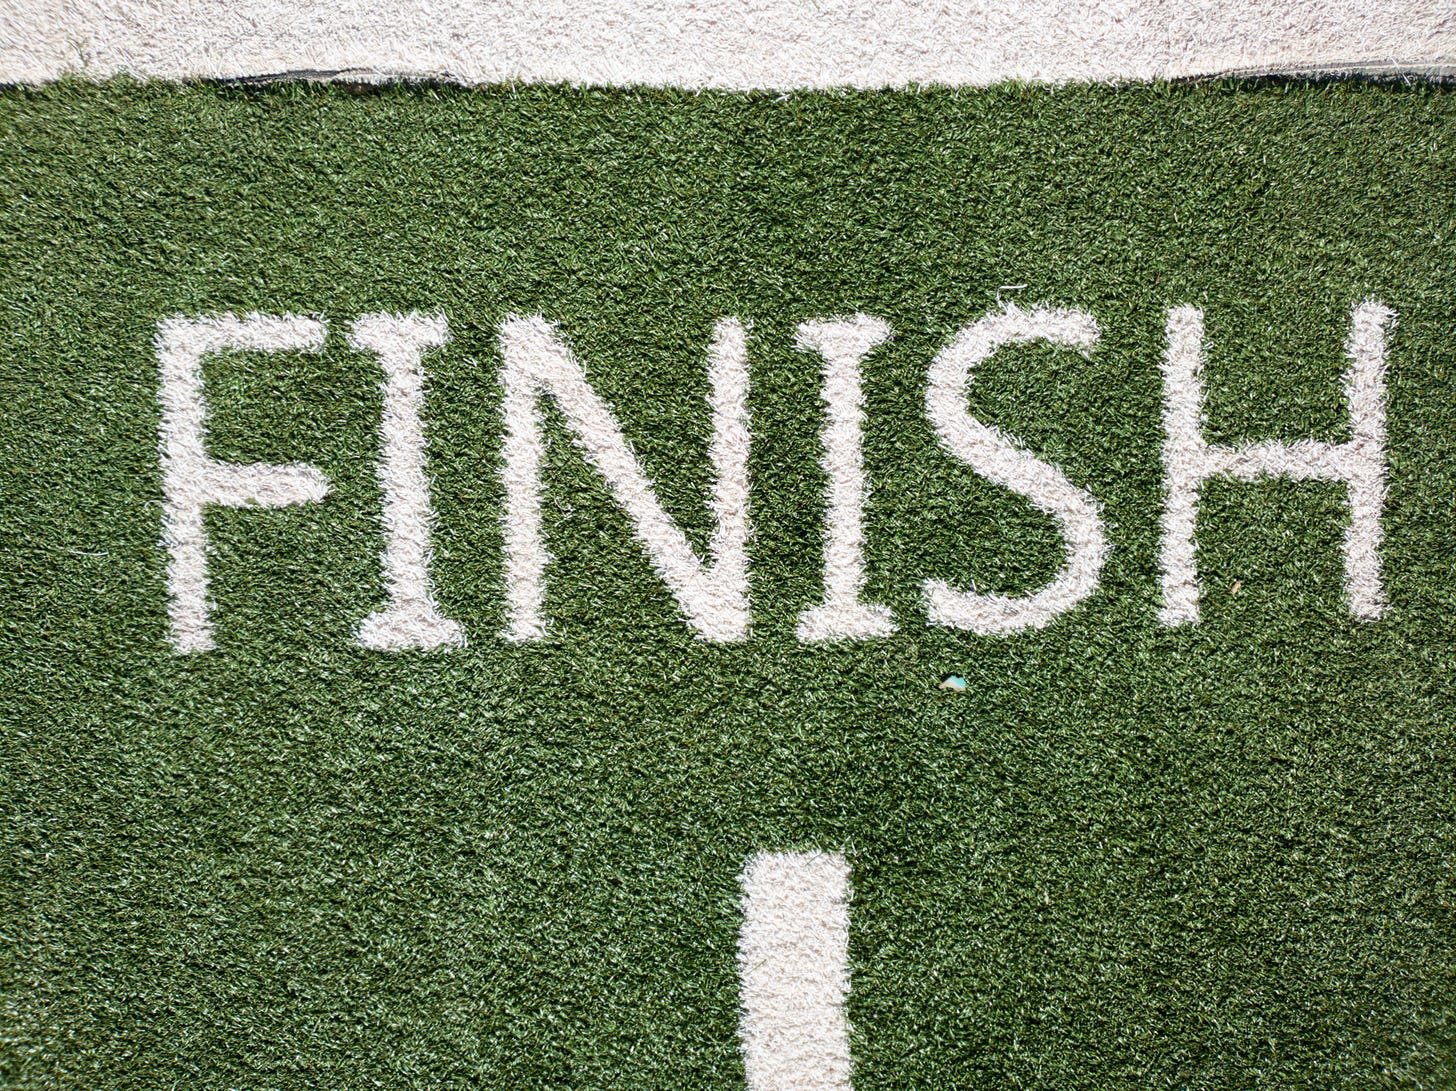 Finish sign painted on grass. Photo by Joshua Hoehne on Unsplash.